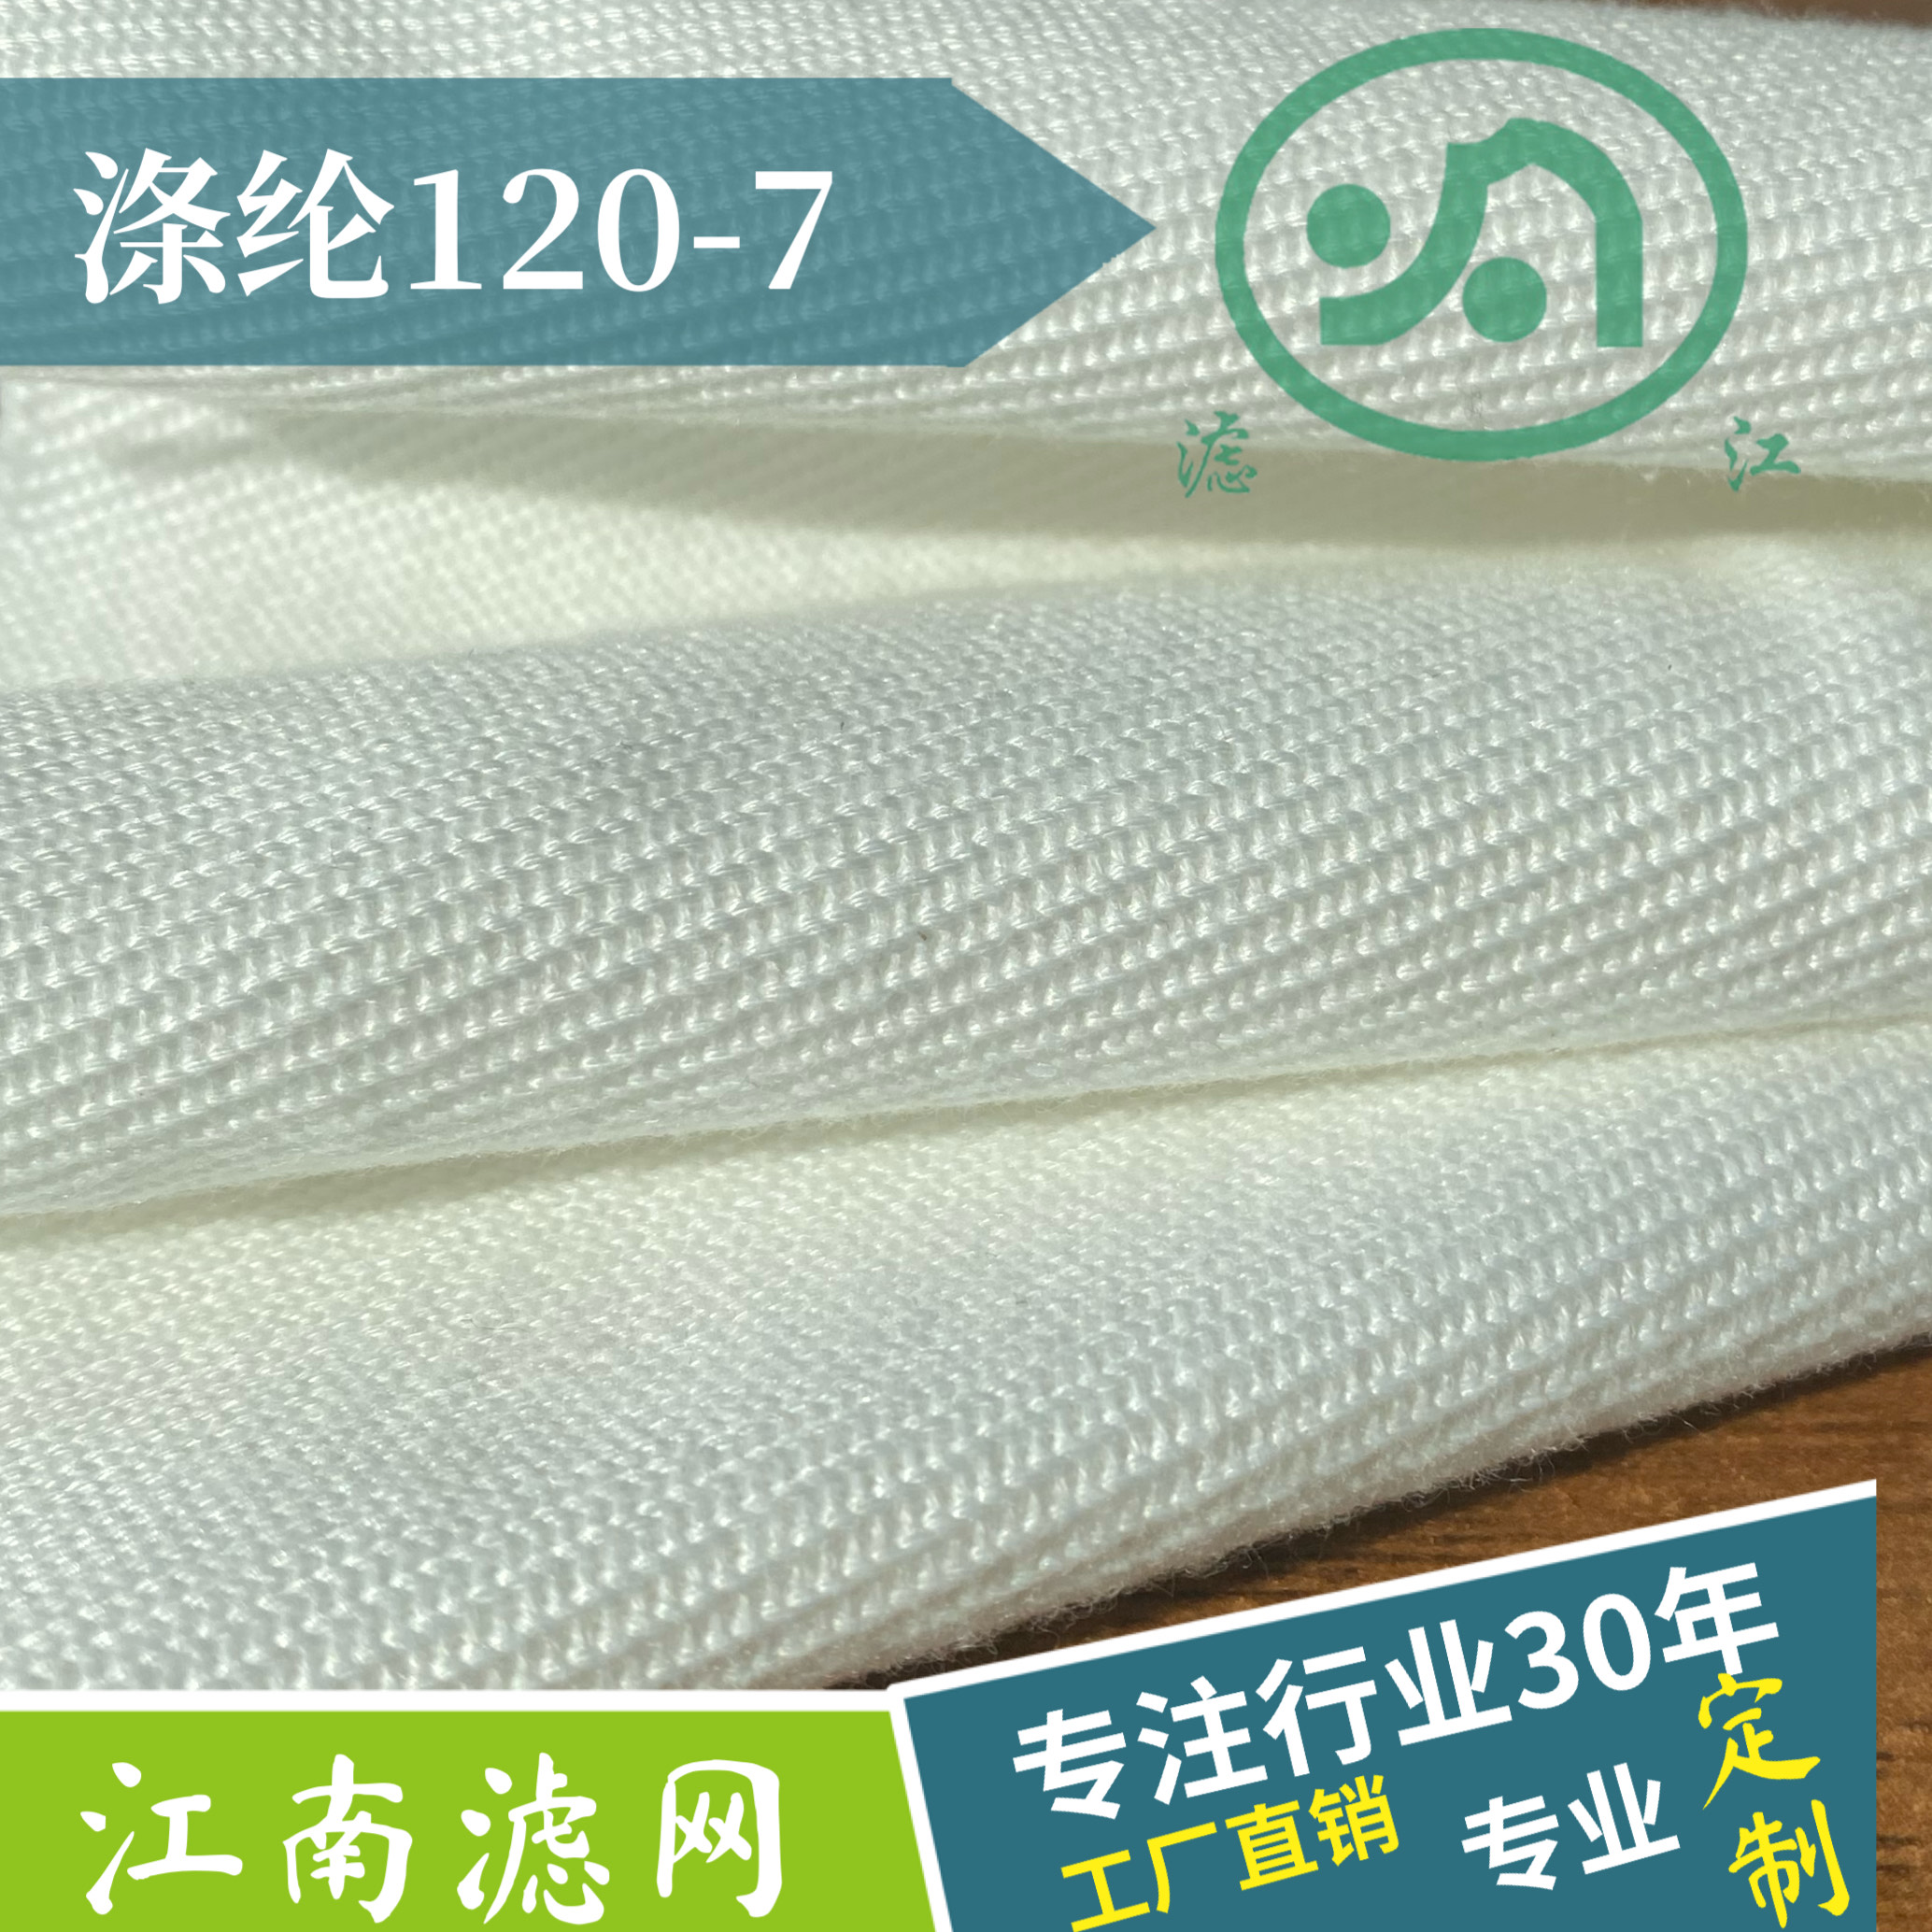 Polyester filter cloth 120-7